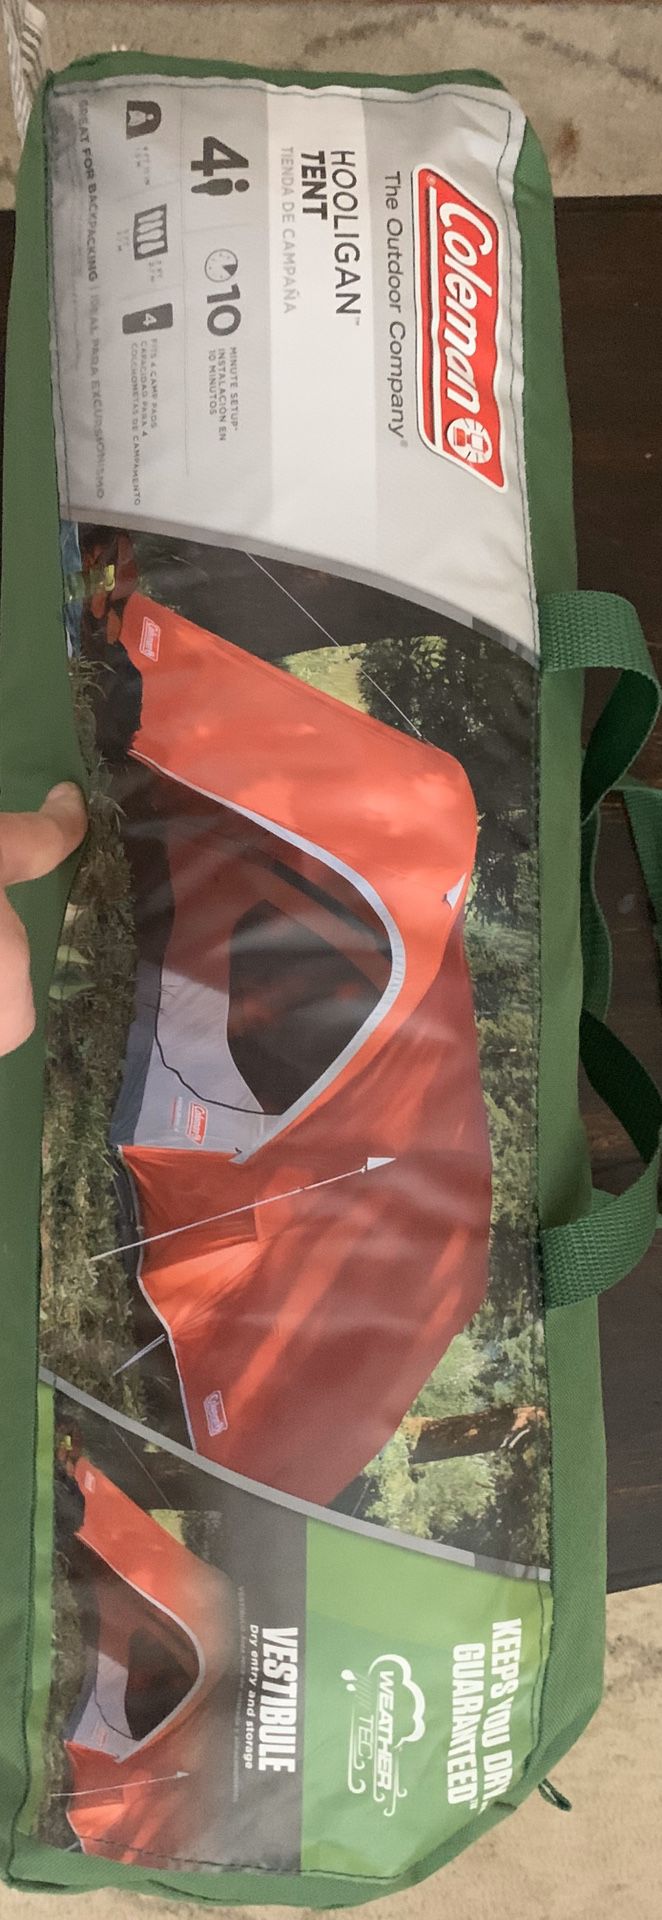 Coleman camping gear